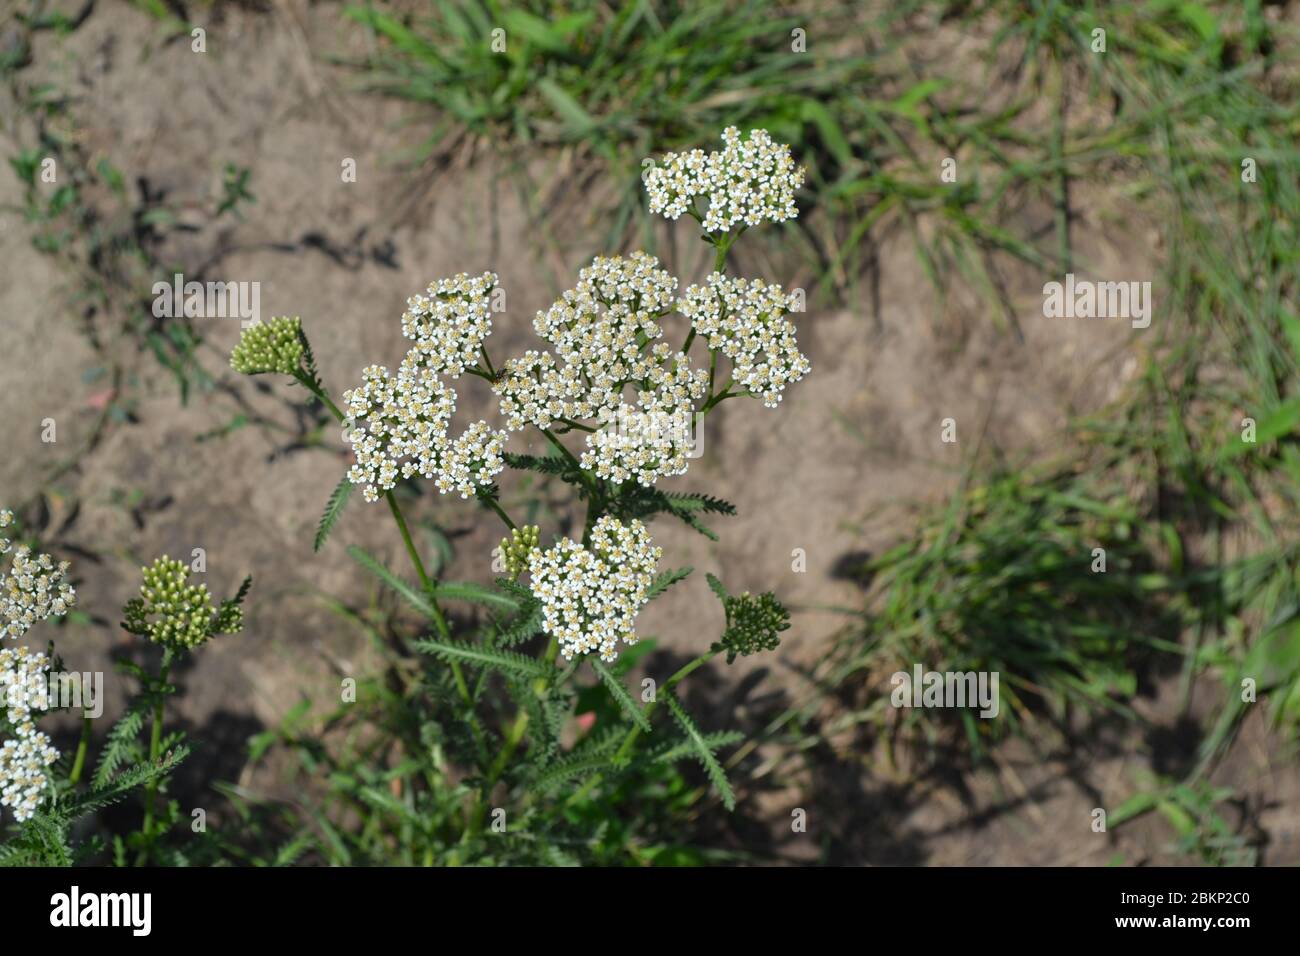 Achillea millefolium, a hairy herb with a rhizome, an Asteraceae family. White flowers surrounded by green leaves. Horizontal photo Stock Photo